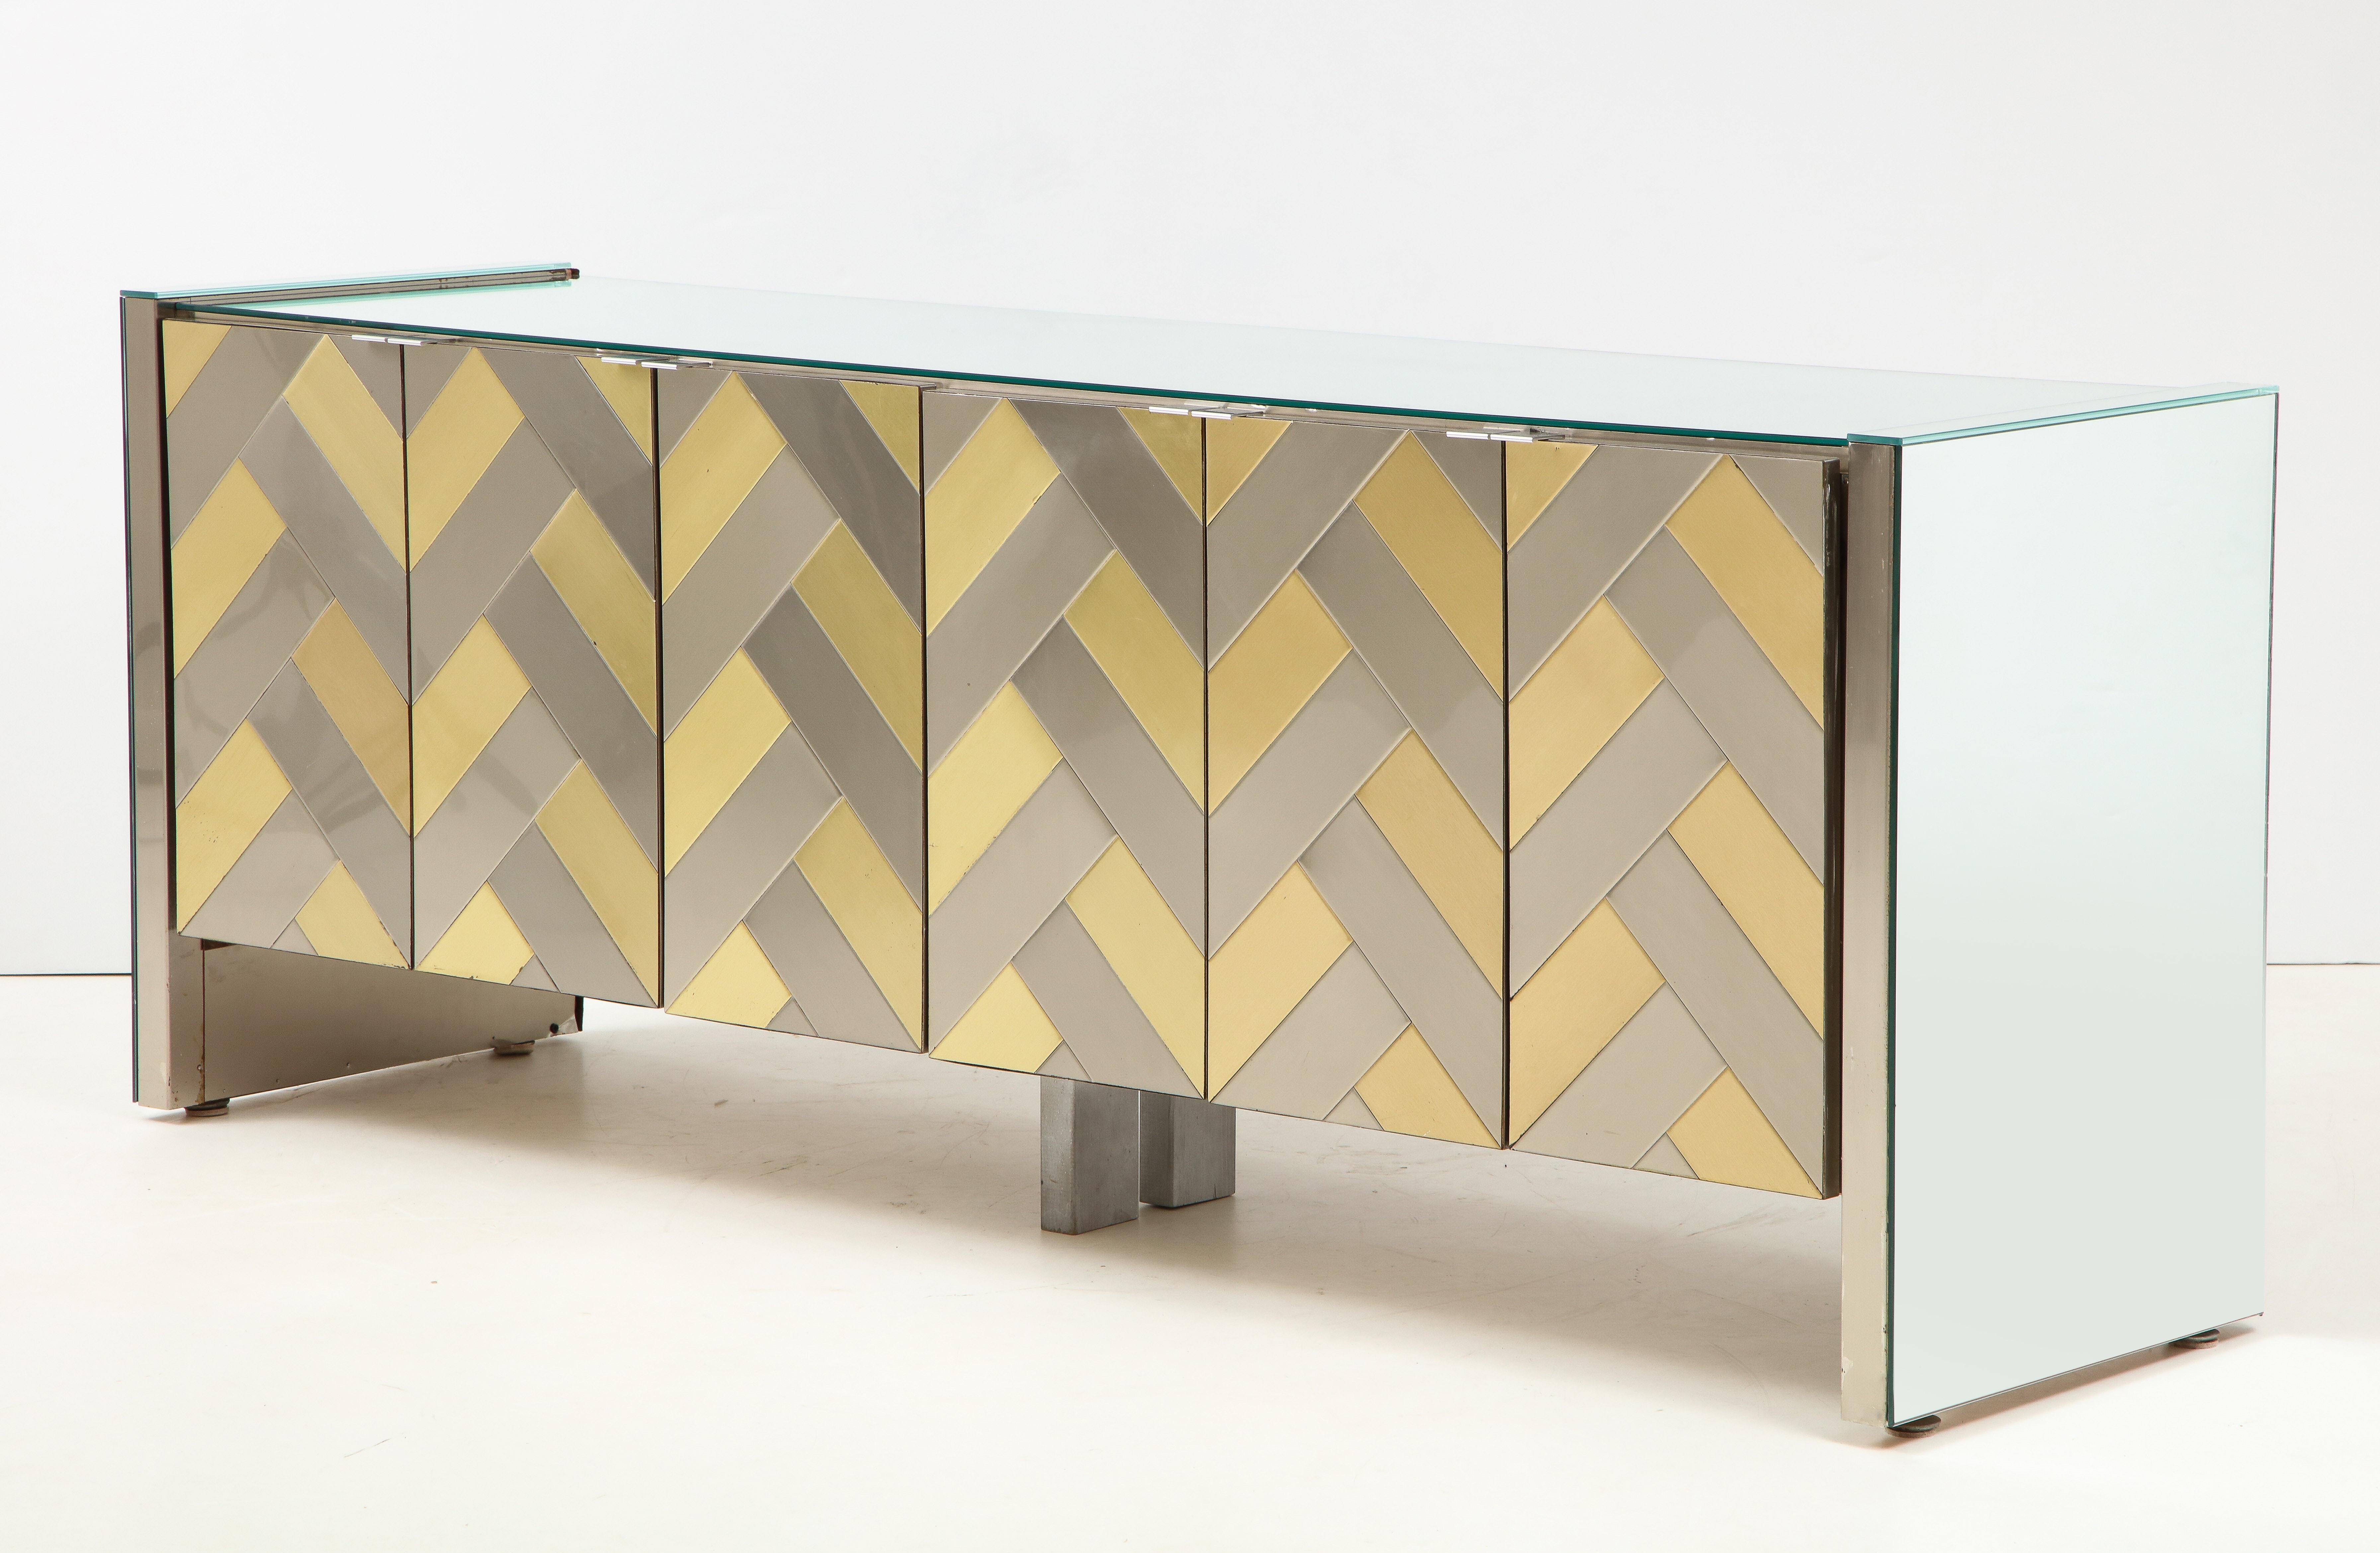 Stunning large brass and chrome chevron design cabinet by Ello.
The beautiful brass and chrome decor panels have a chevron design pattern with chrome pulls
that open to reveal six matching size drawers.
The top and sides of the cabinet are mirrored